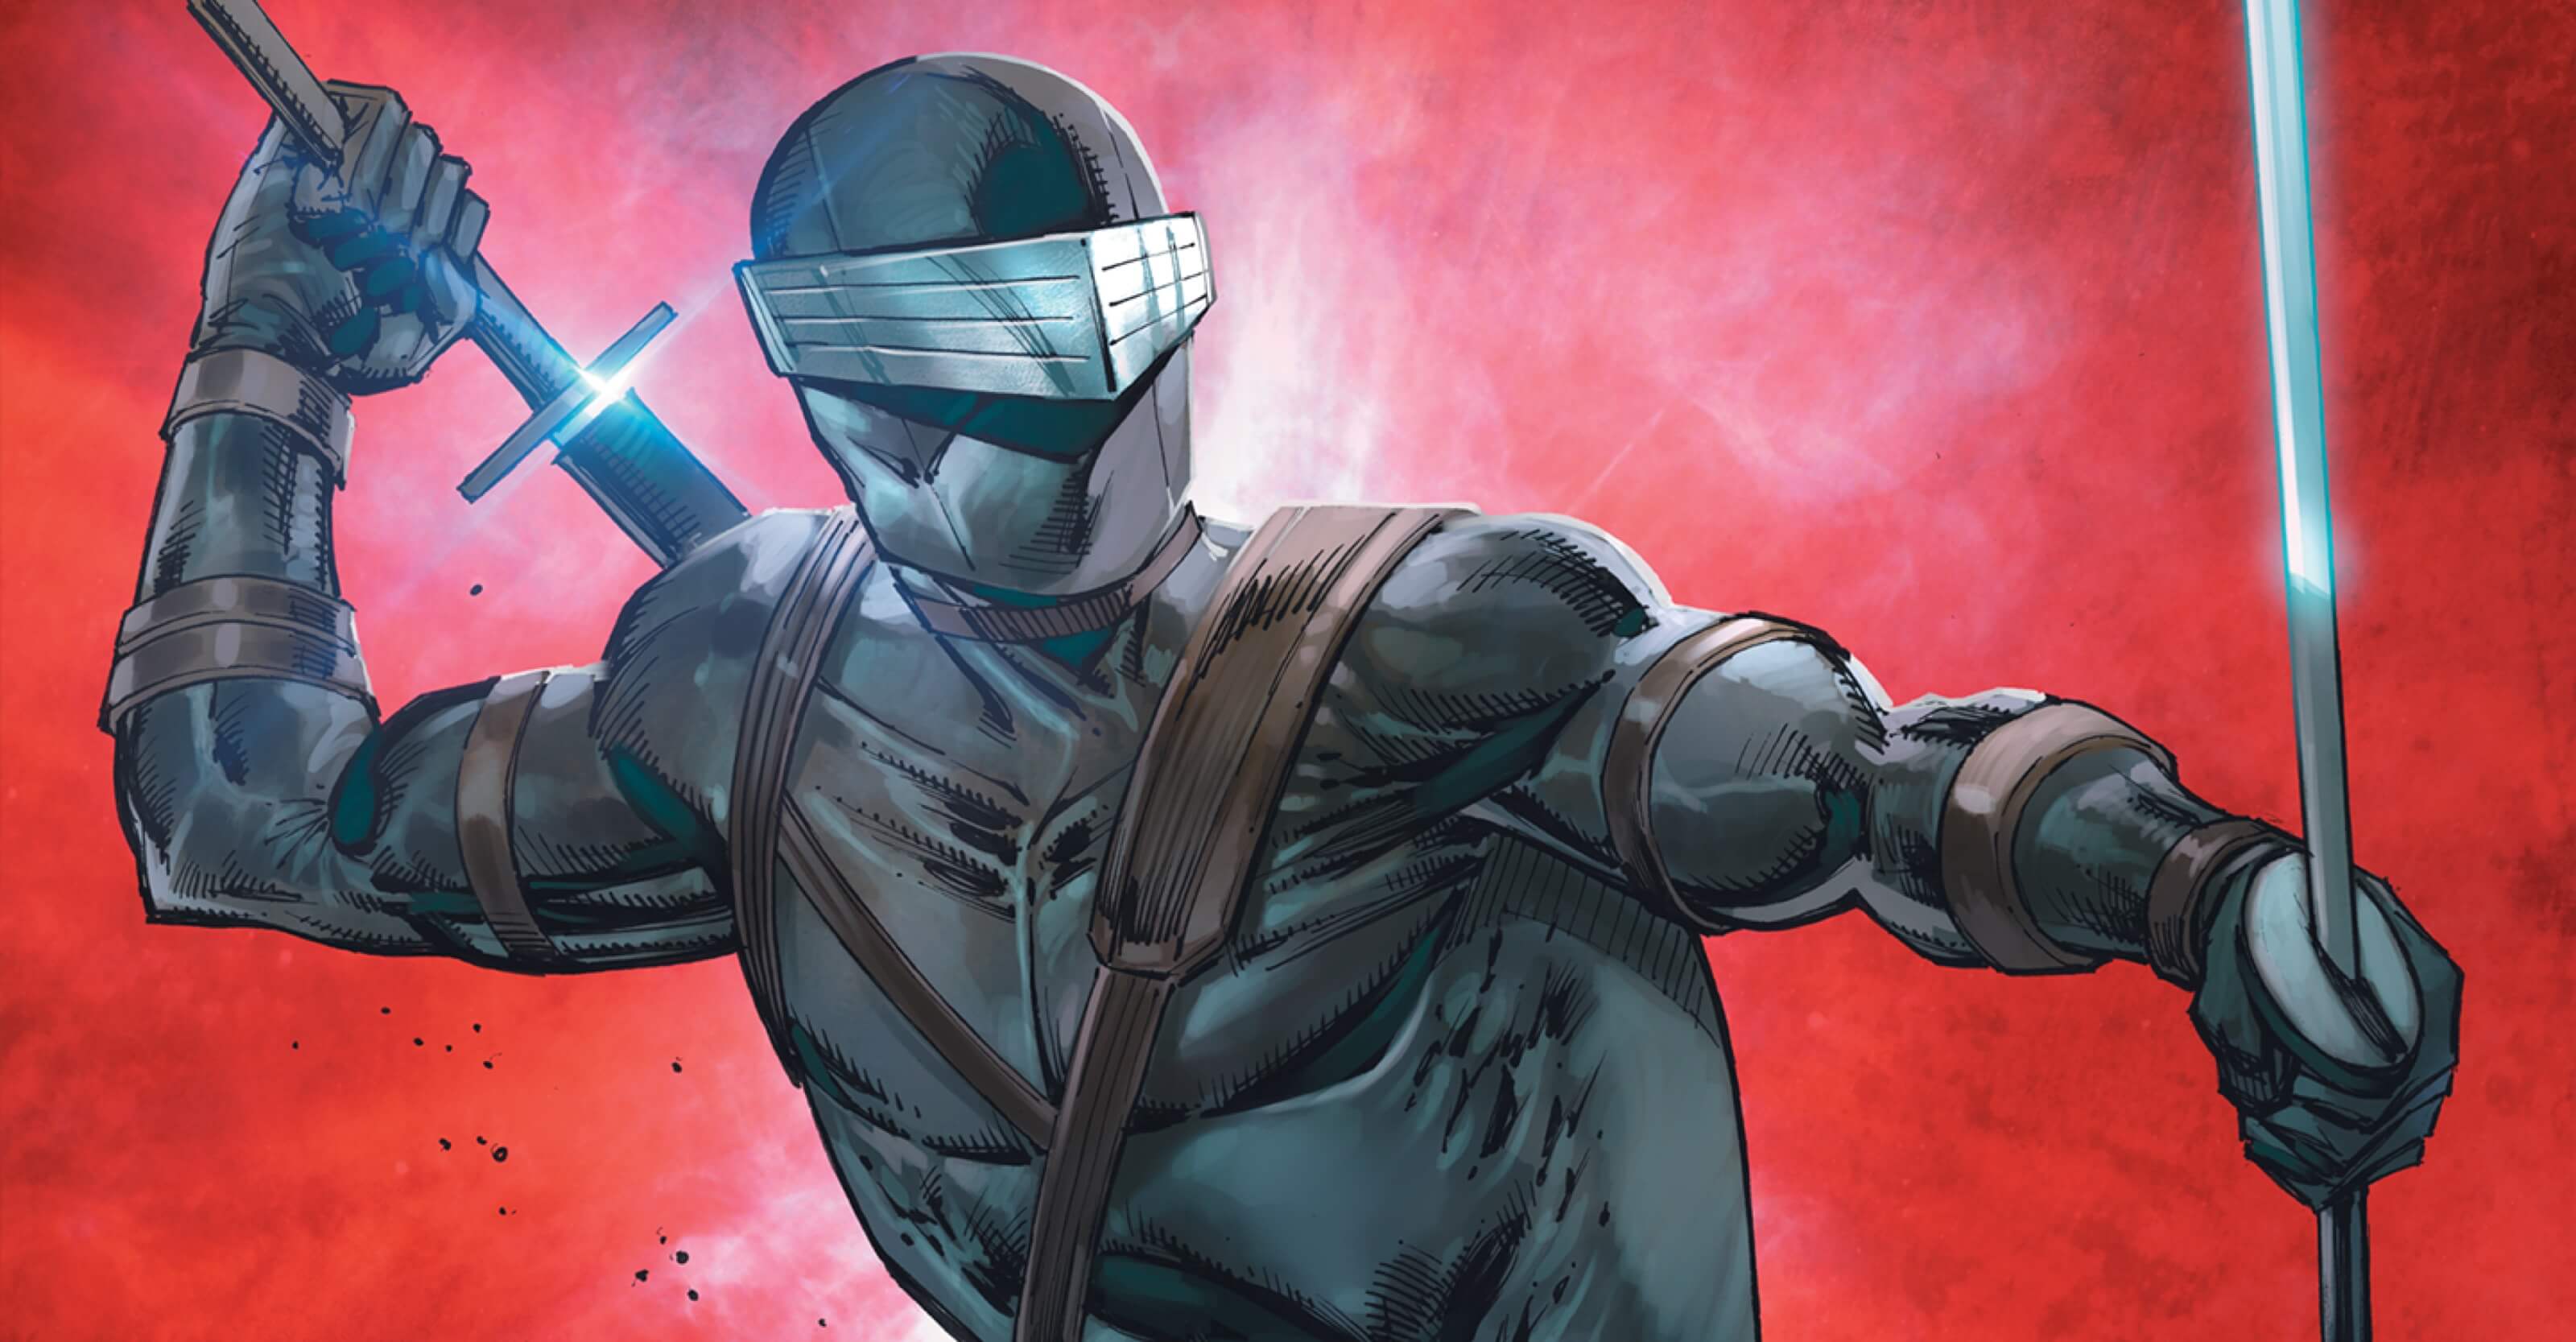 Rob Liefeld's Snake Eyes: Deadgame Rules December with Declassified One-Shot and Trade Paperback